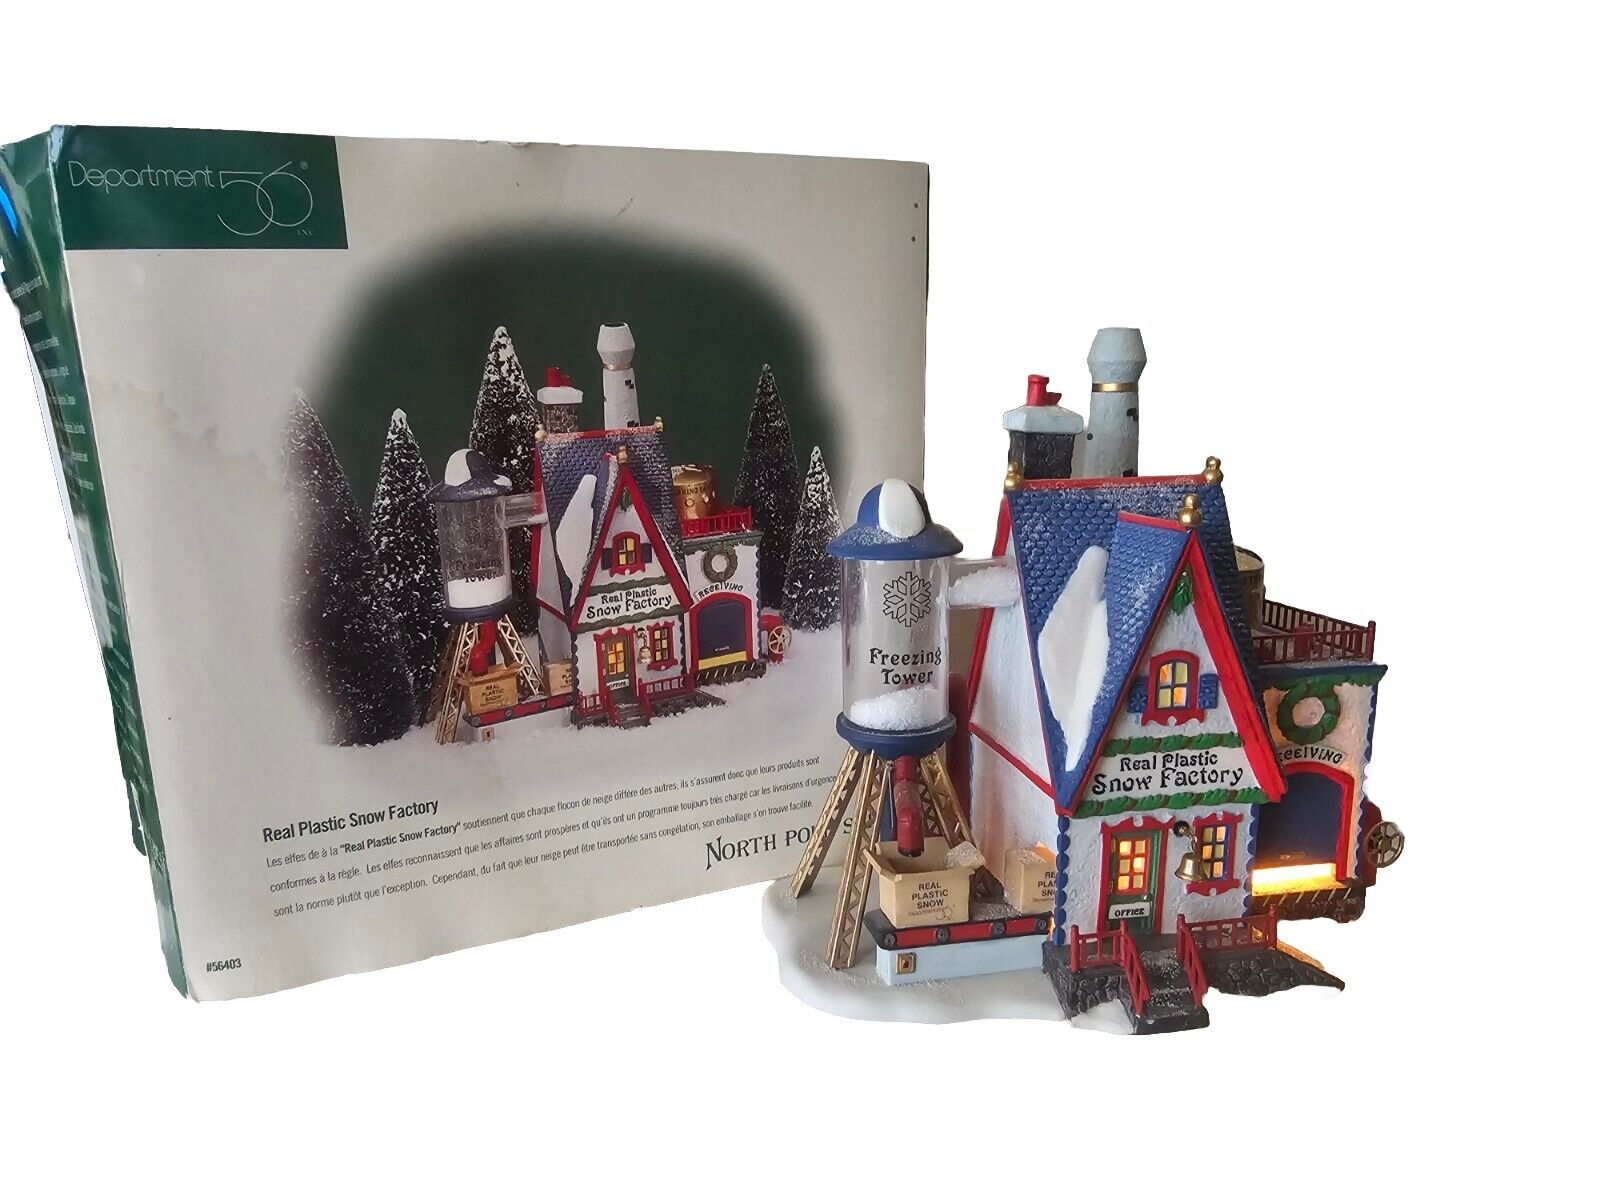 Department 56 Real Plastic Snow Factory 56403 North Pole Series Box Damage Read